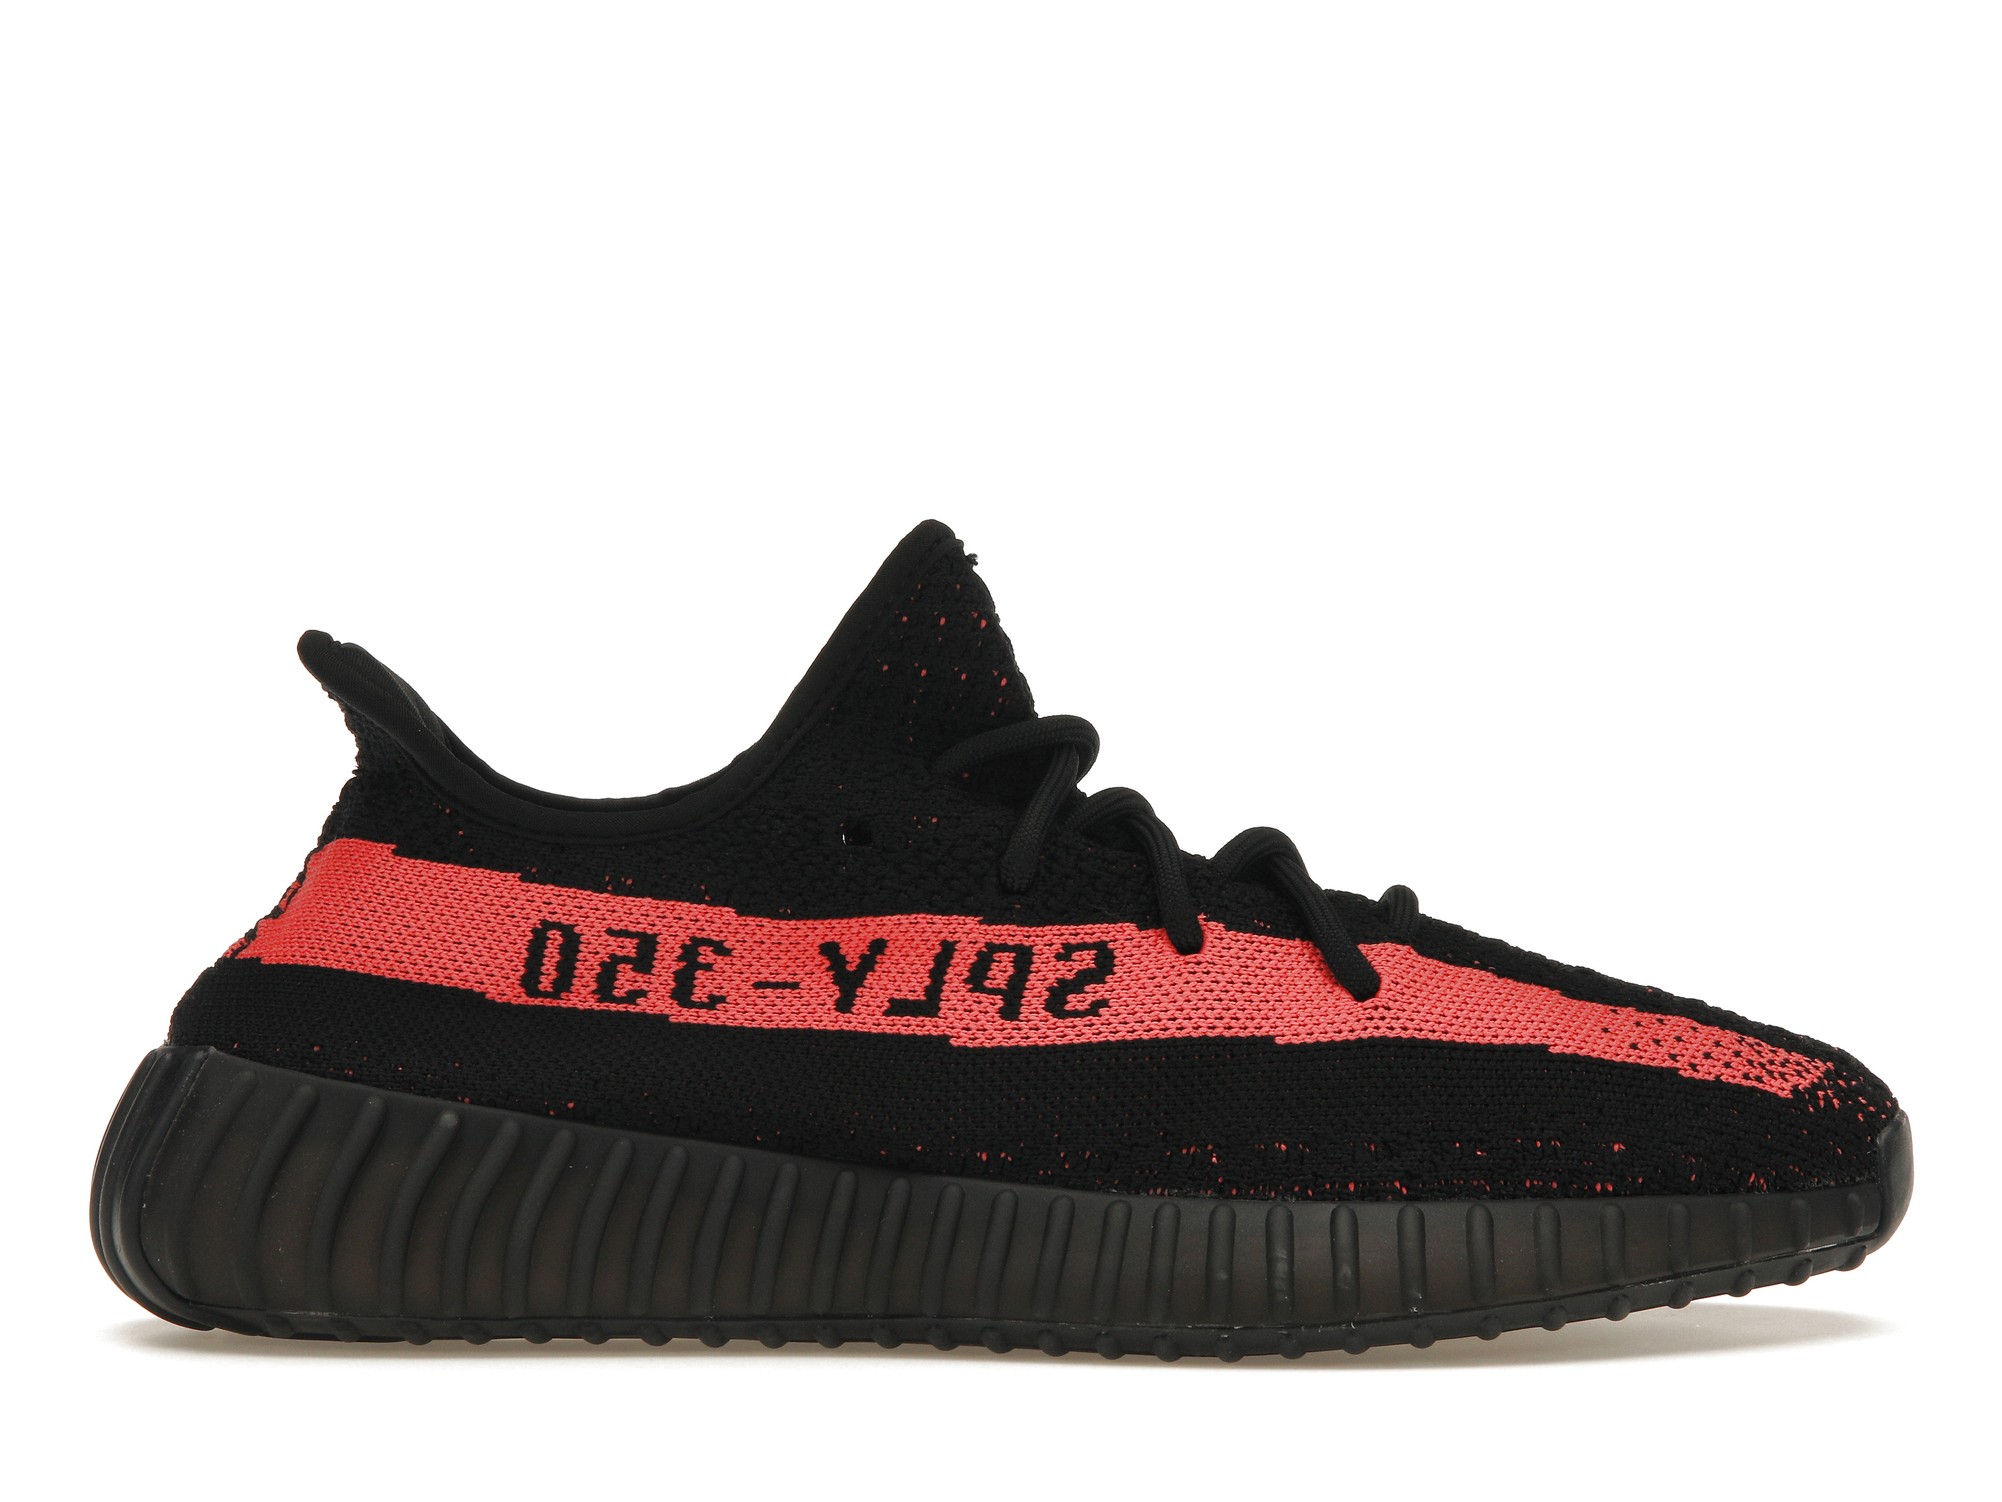 adidas Yeezy Boost 350 V2 Core Black Red (2016/2022/2023) Men's